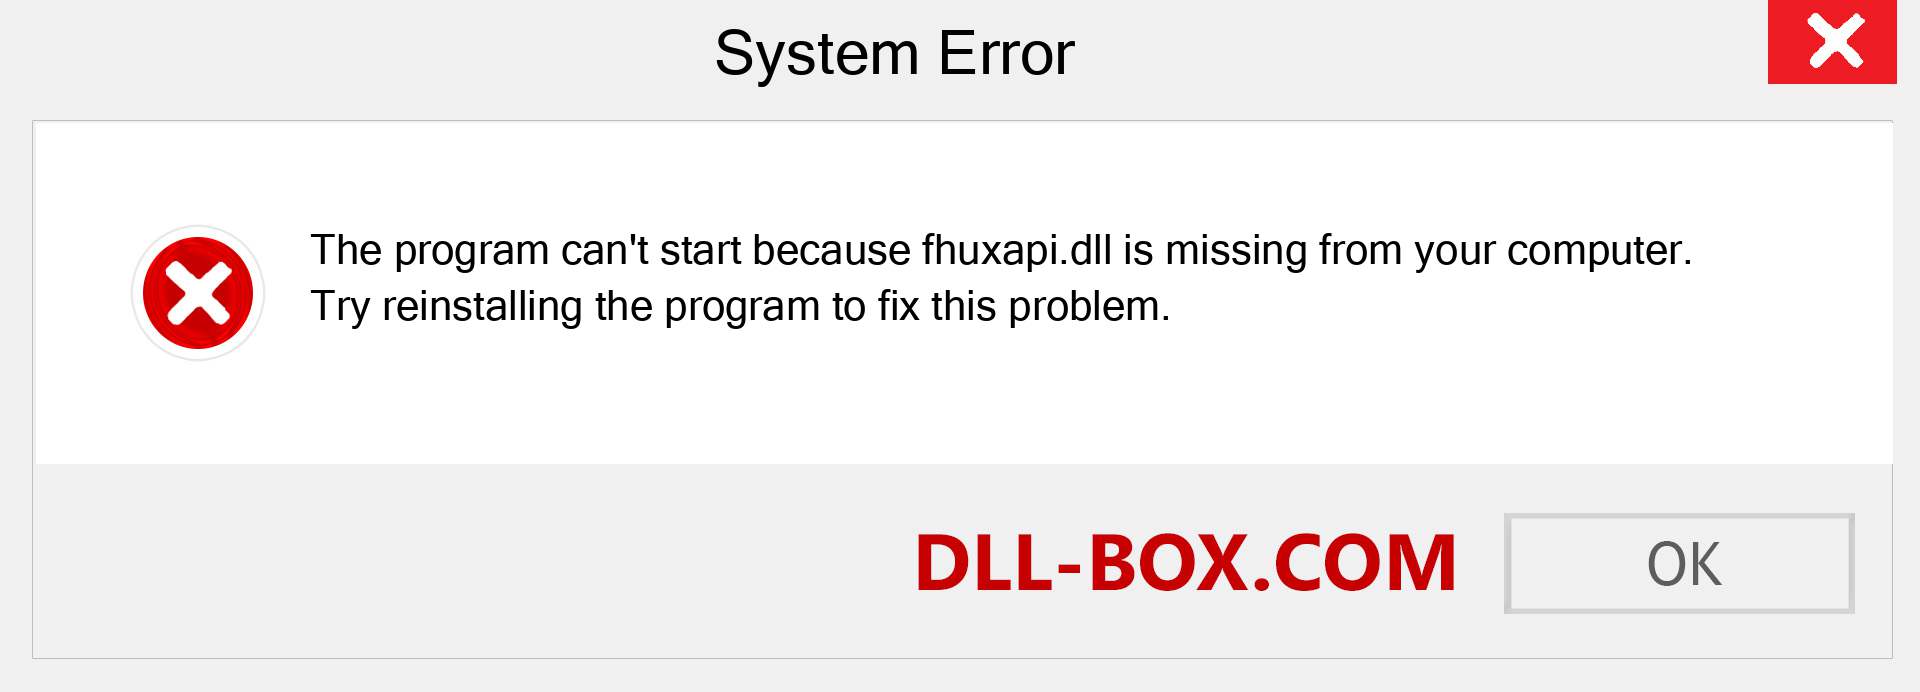  fhuxapi.dll file is missing?. Download for Windows 7, 8, 10 - Fix  fhuxapi dll Missing Error on Windows, photos, images